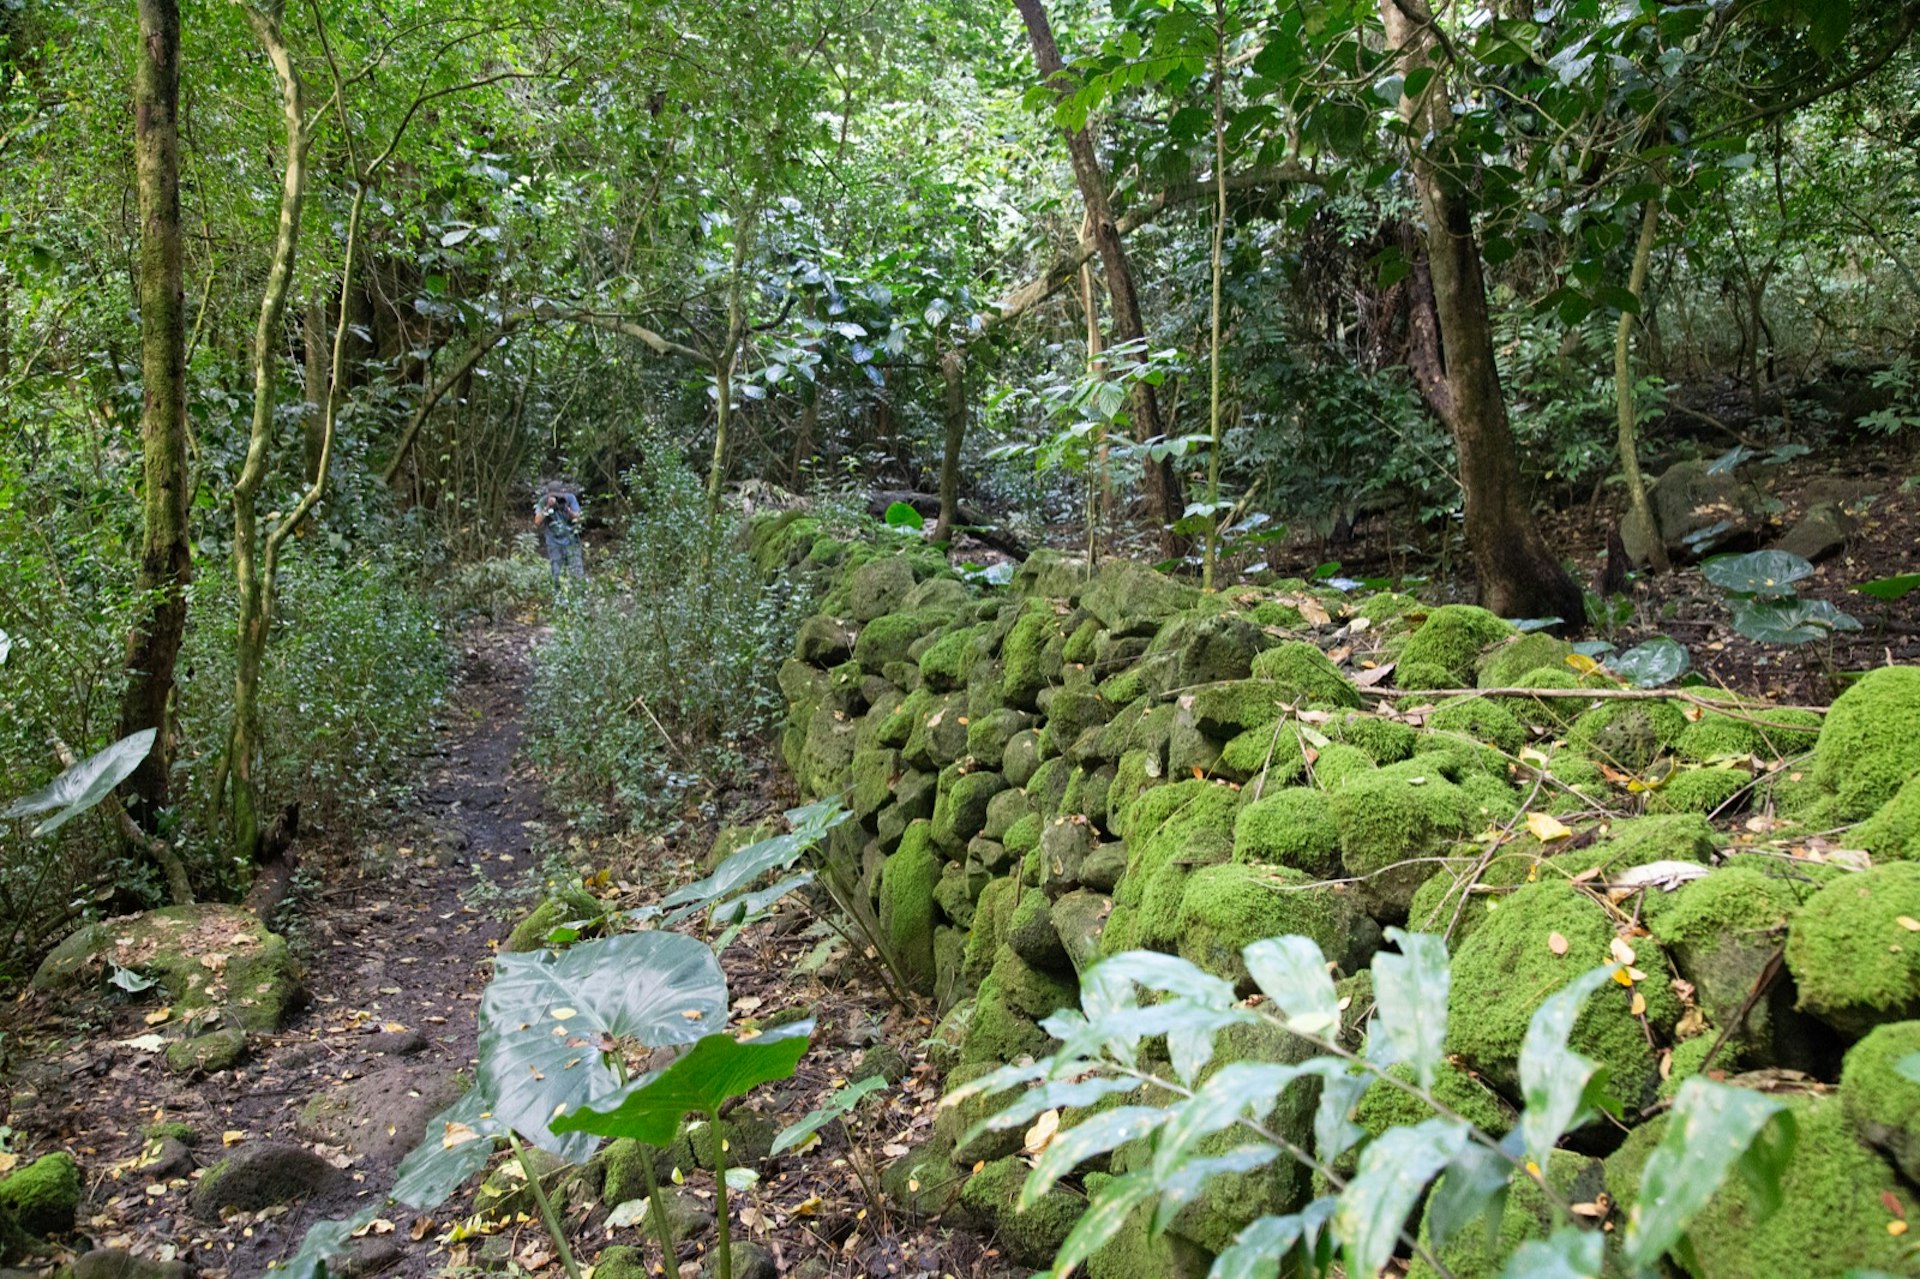 A wall of moss-covered stones stretches through the jungle next to a path